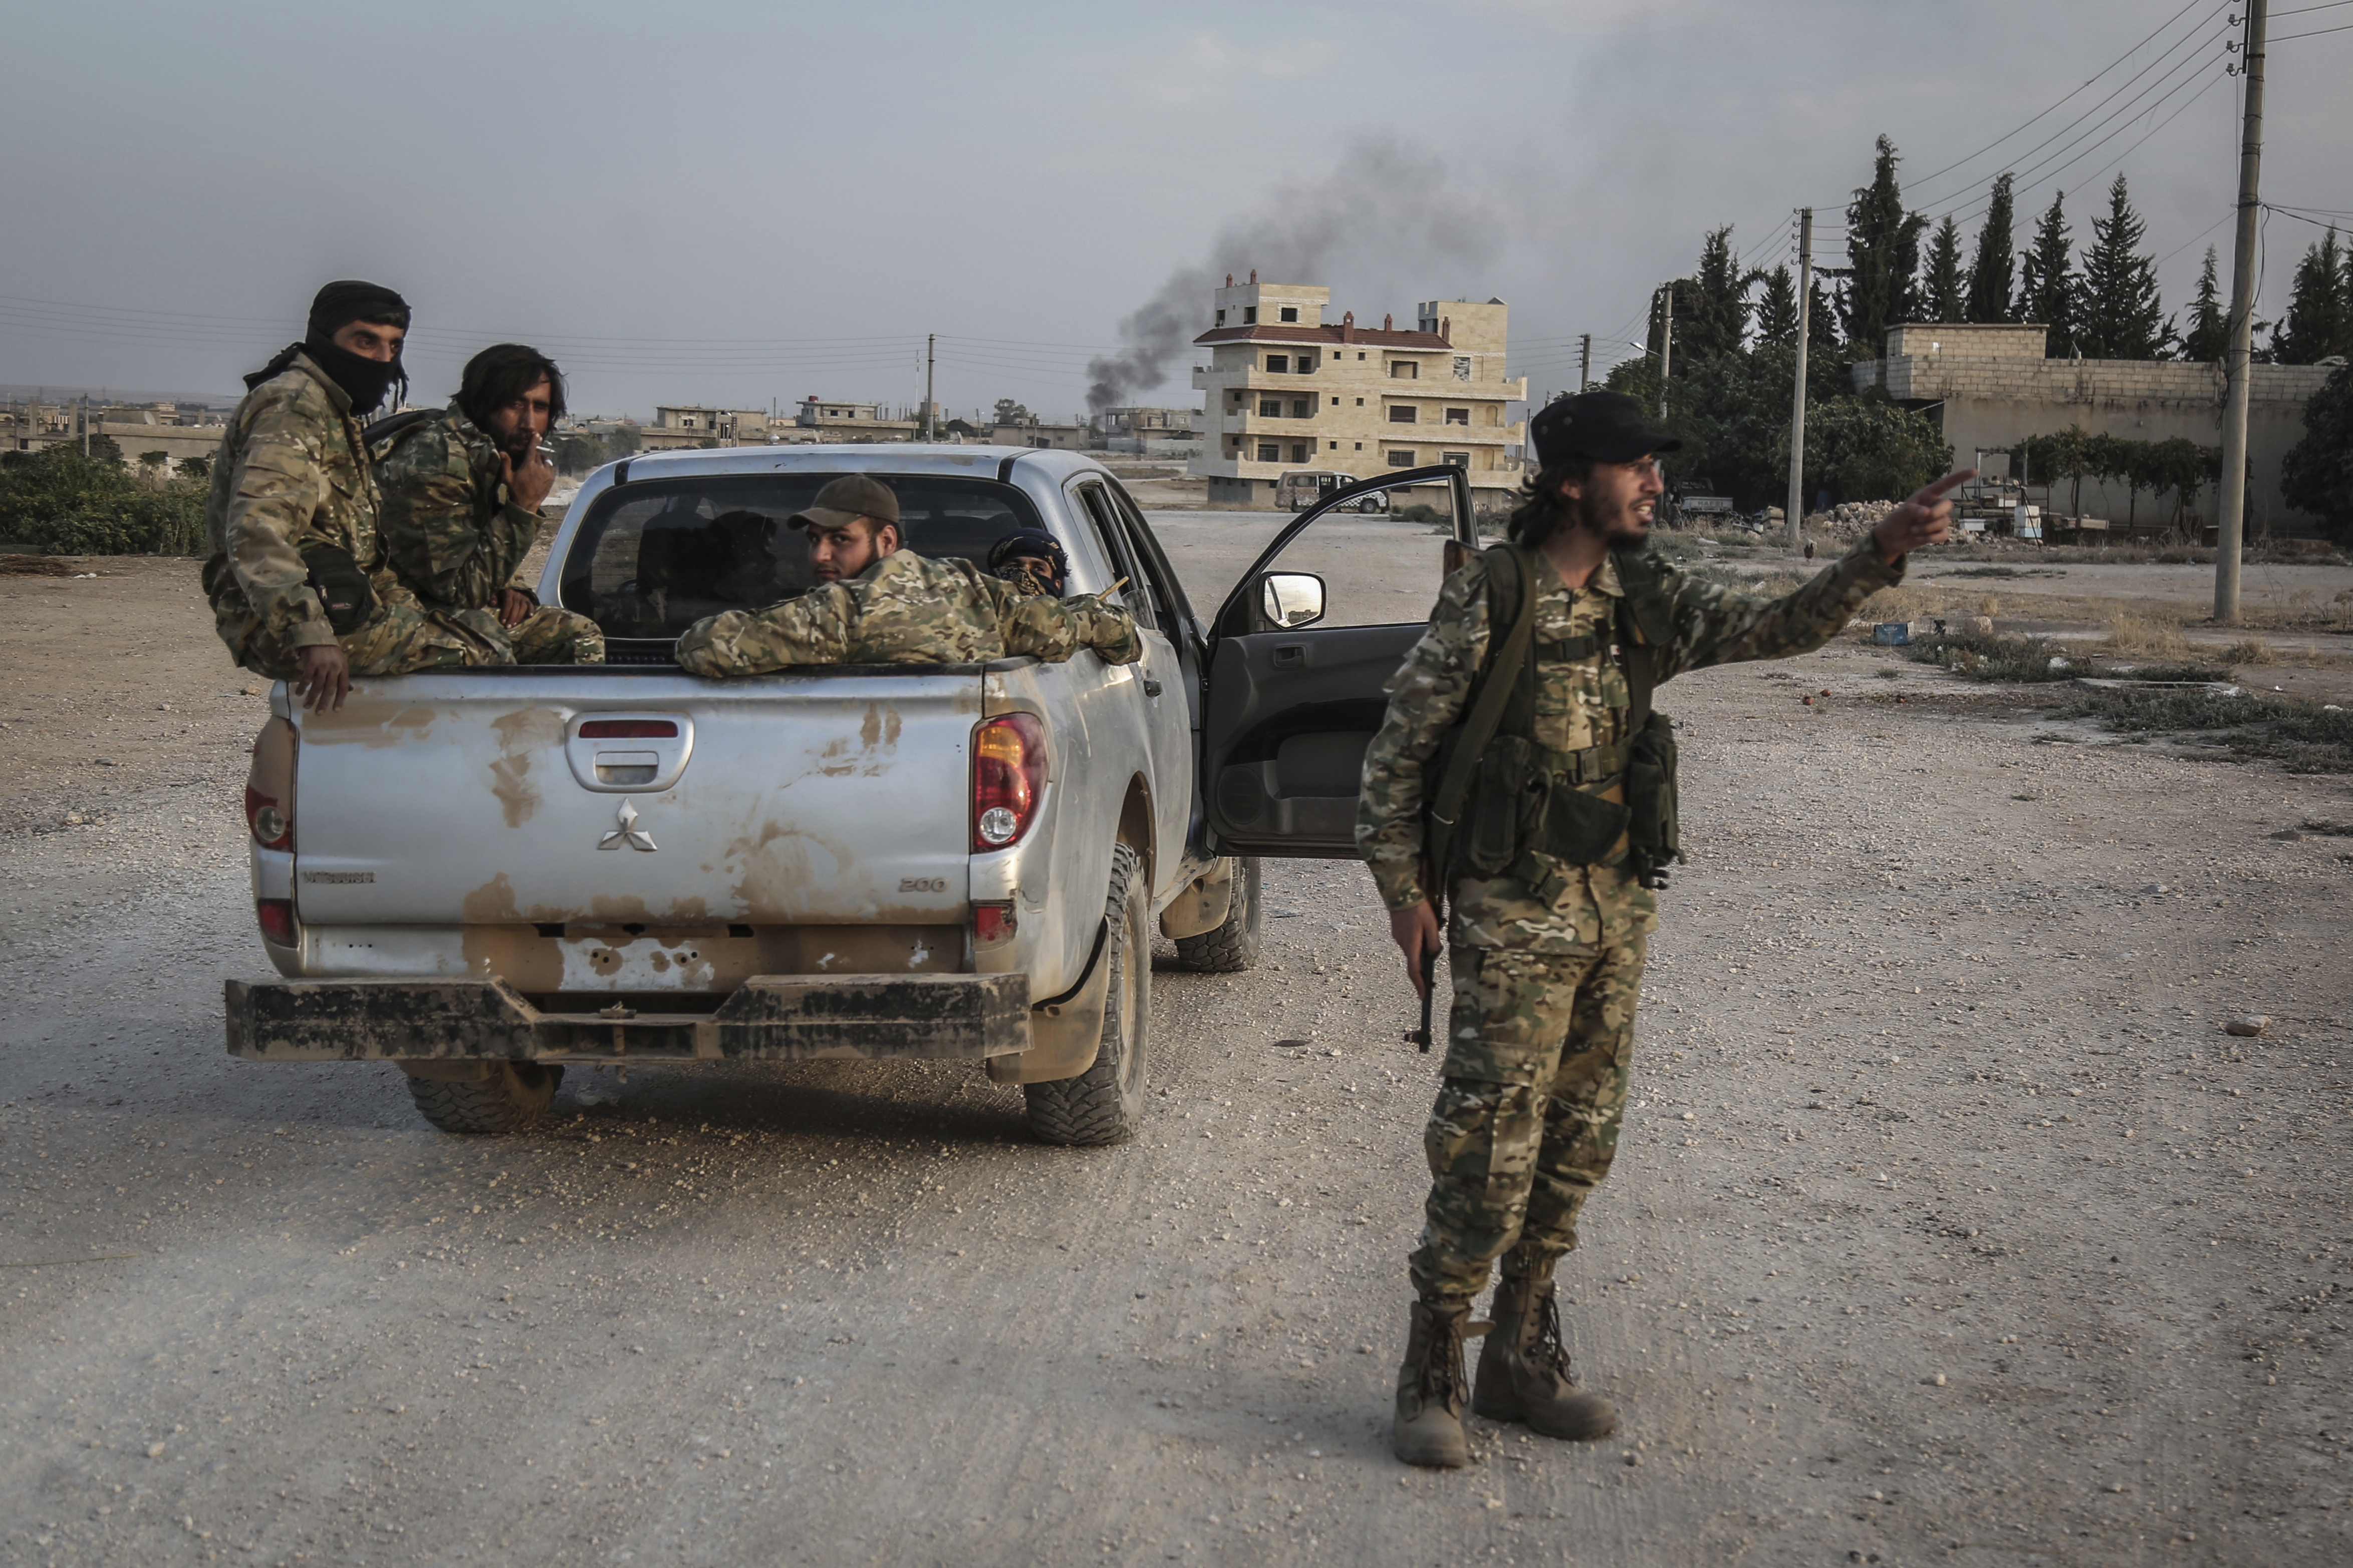 14 October 2019, Syria, Tell Abiad: Soldiers of the Turkish-backed Syrian National Army patrol a street after clashes with Kurdish fighters. Photo by: Anas Alkharboutli/picture-alliance/dpa/AP Images